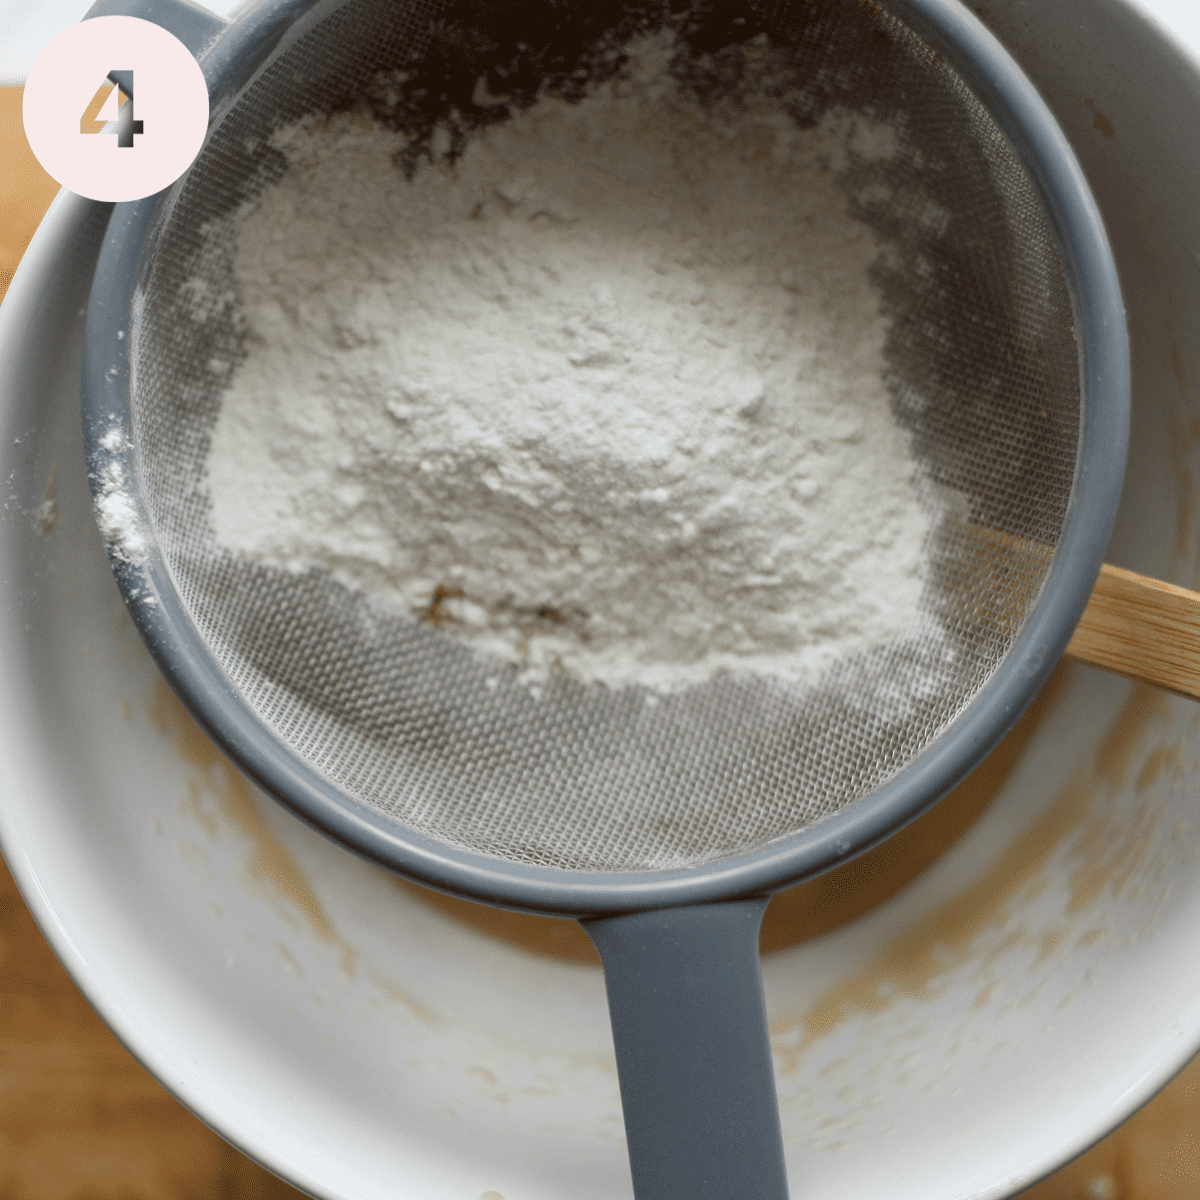 Sifting flour into the cake batter.